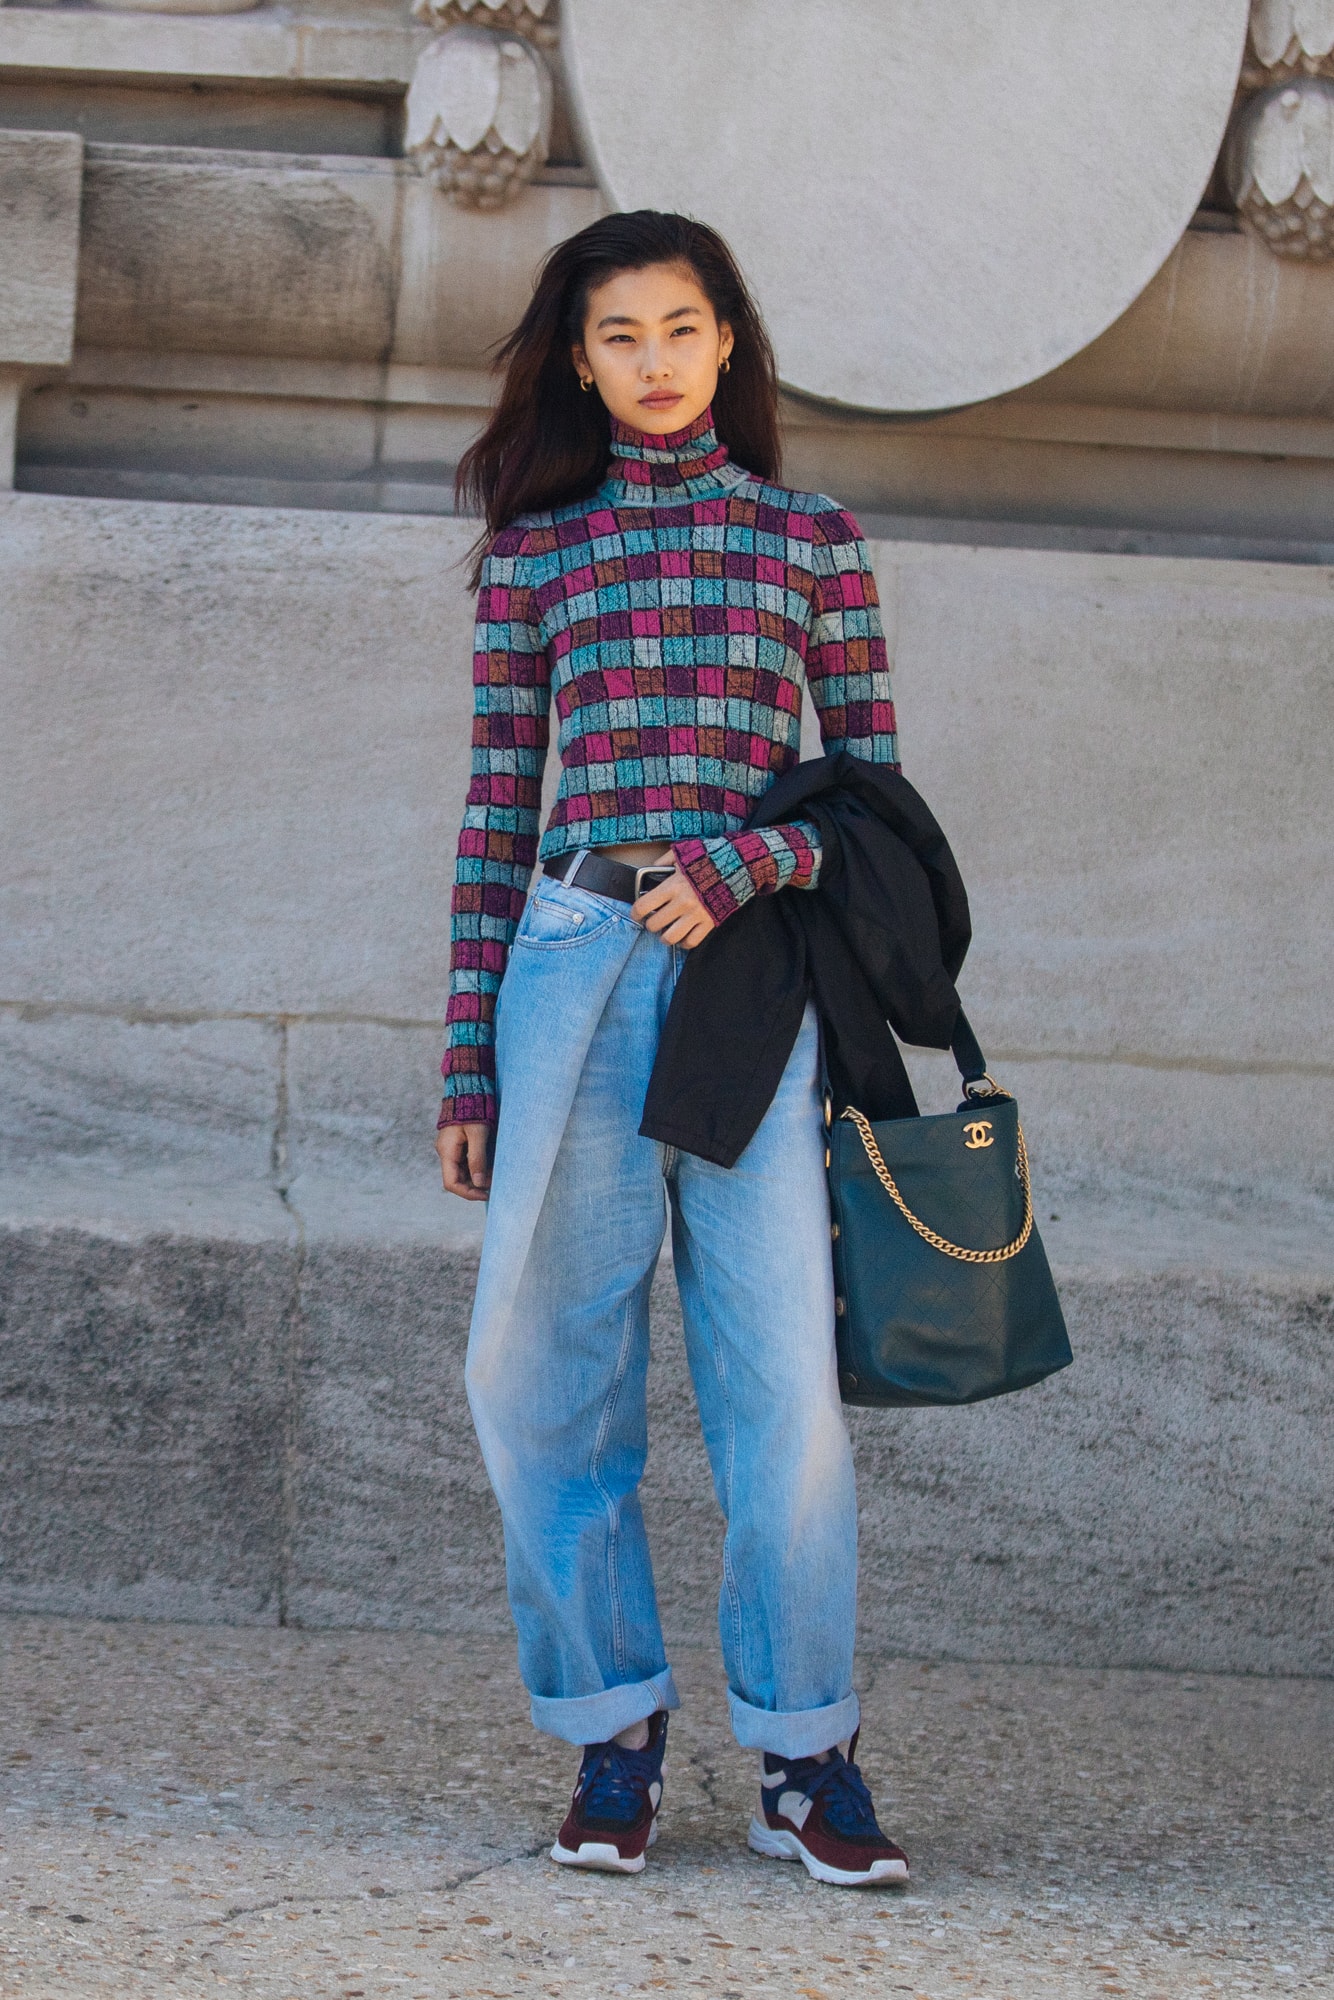 5 Baggy Jeans Outfit Ideas to Wear and Shop Now